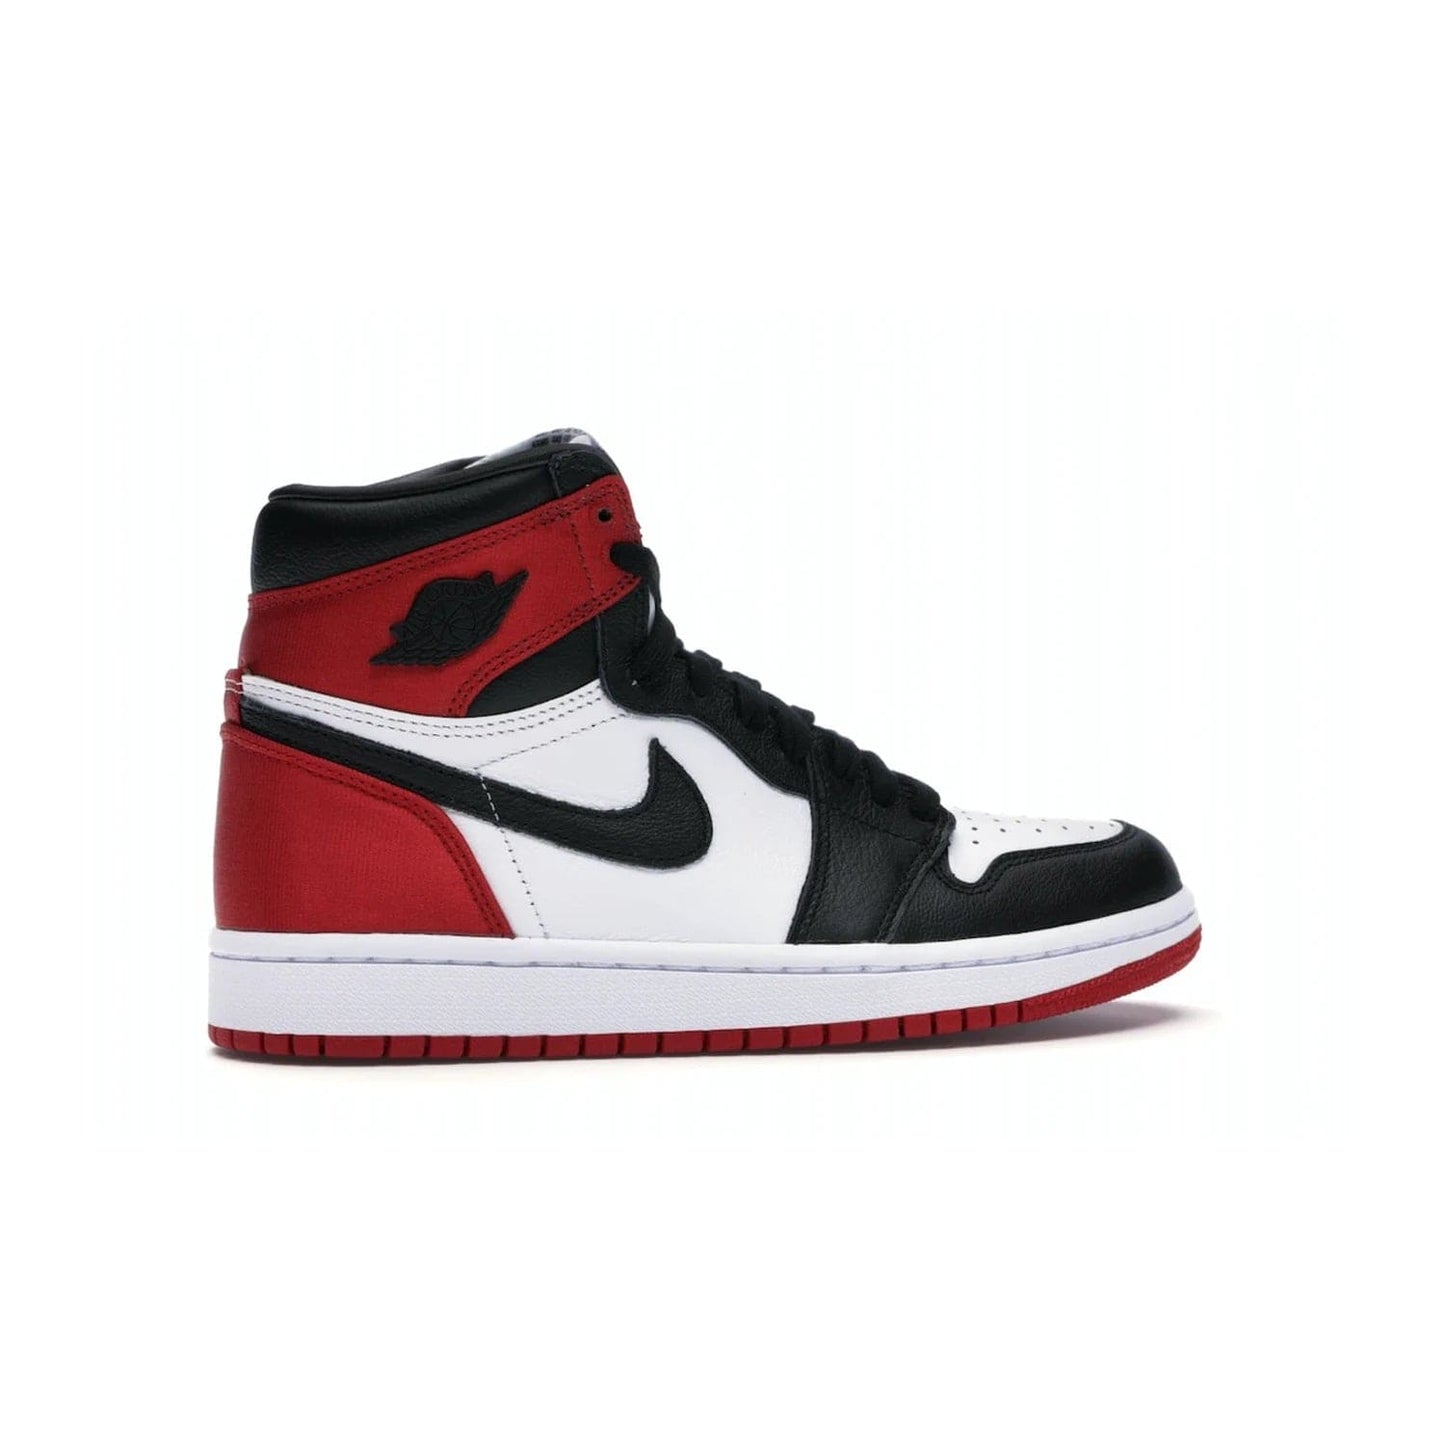 Jordan 1 Retro High Satin Black Toe (Women's) - Image 35 - Only at www.BallersClubKickz.com - Luxurious take on the timeless Air Jordan 1. Features a mix of black leather and satin materials with subtle University Red accents. Elevated look with metal Wings logo on the heel. Released in August 2019.